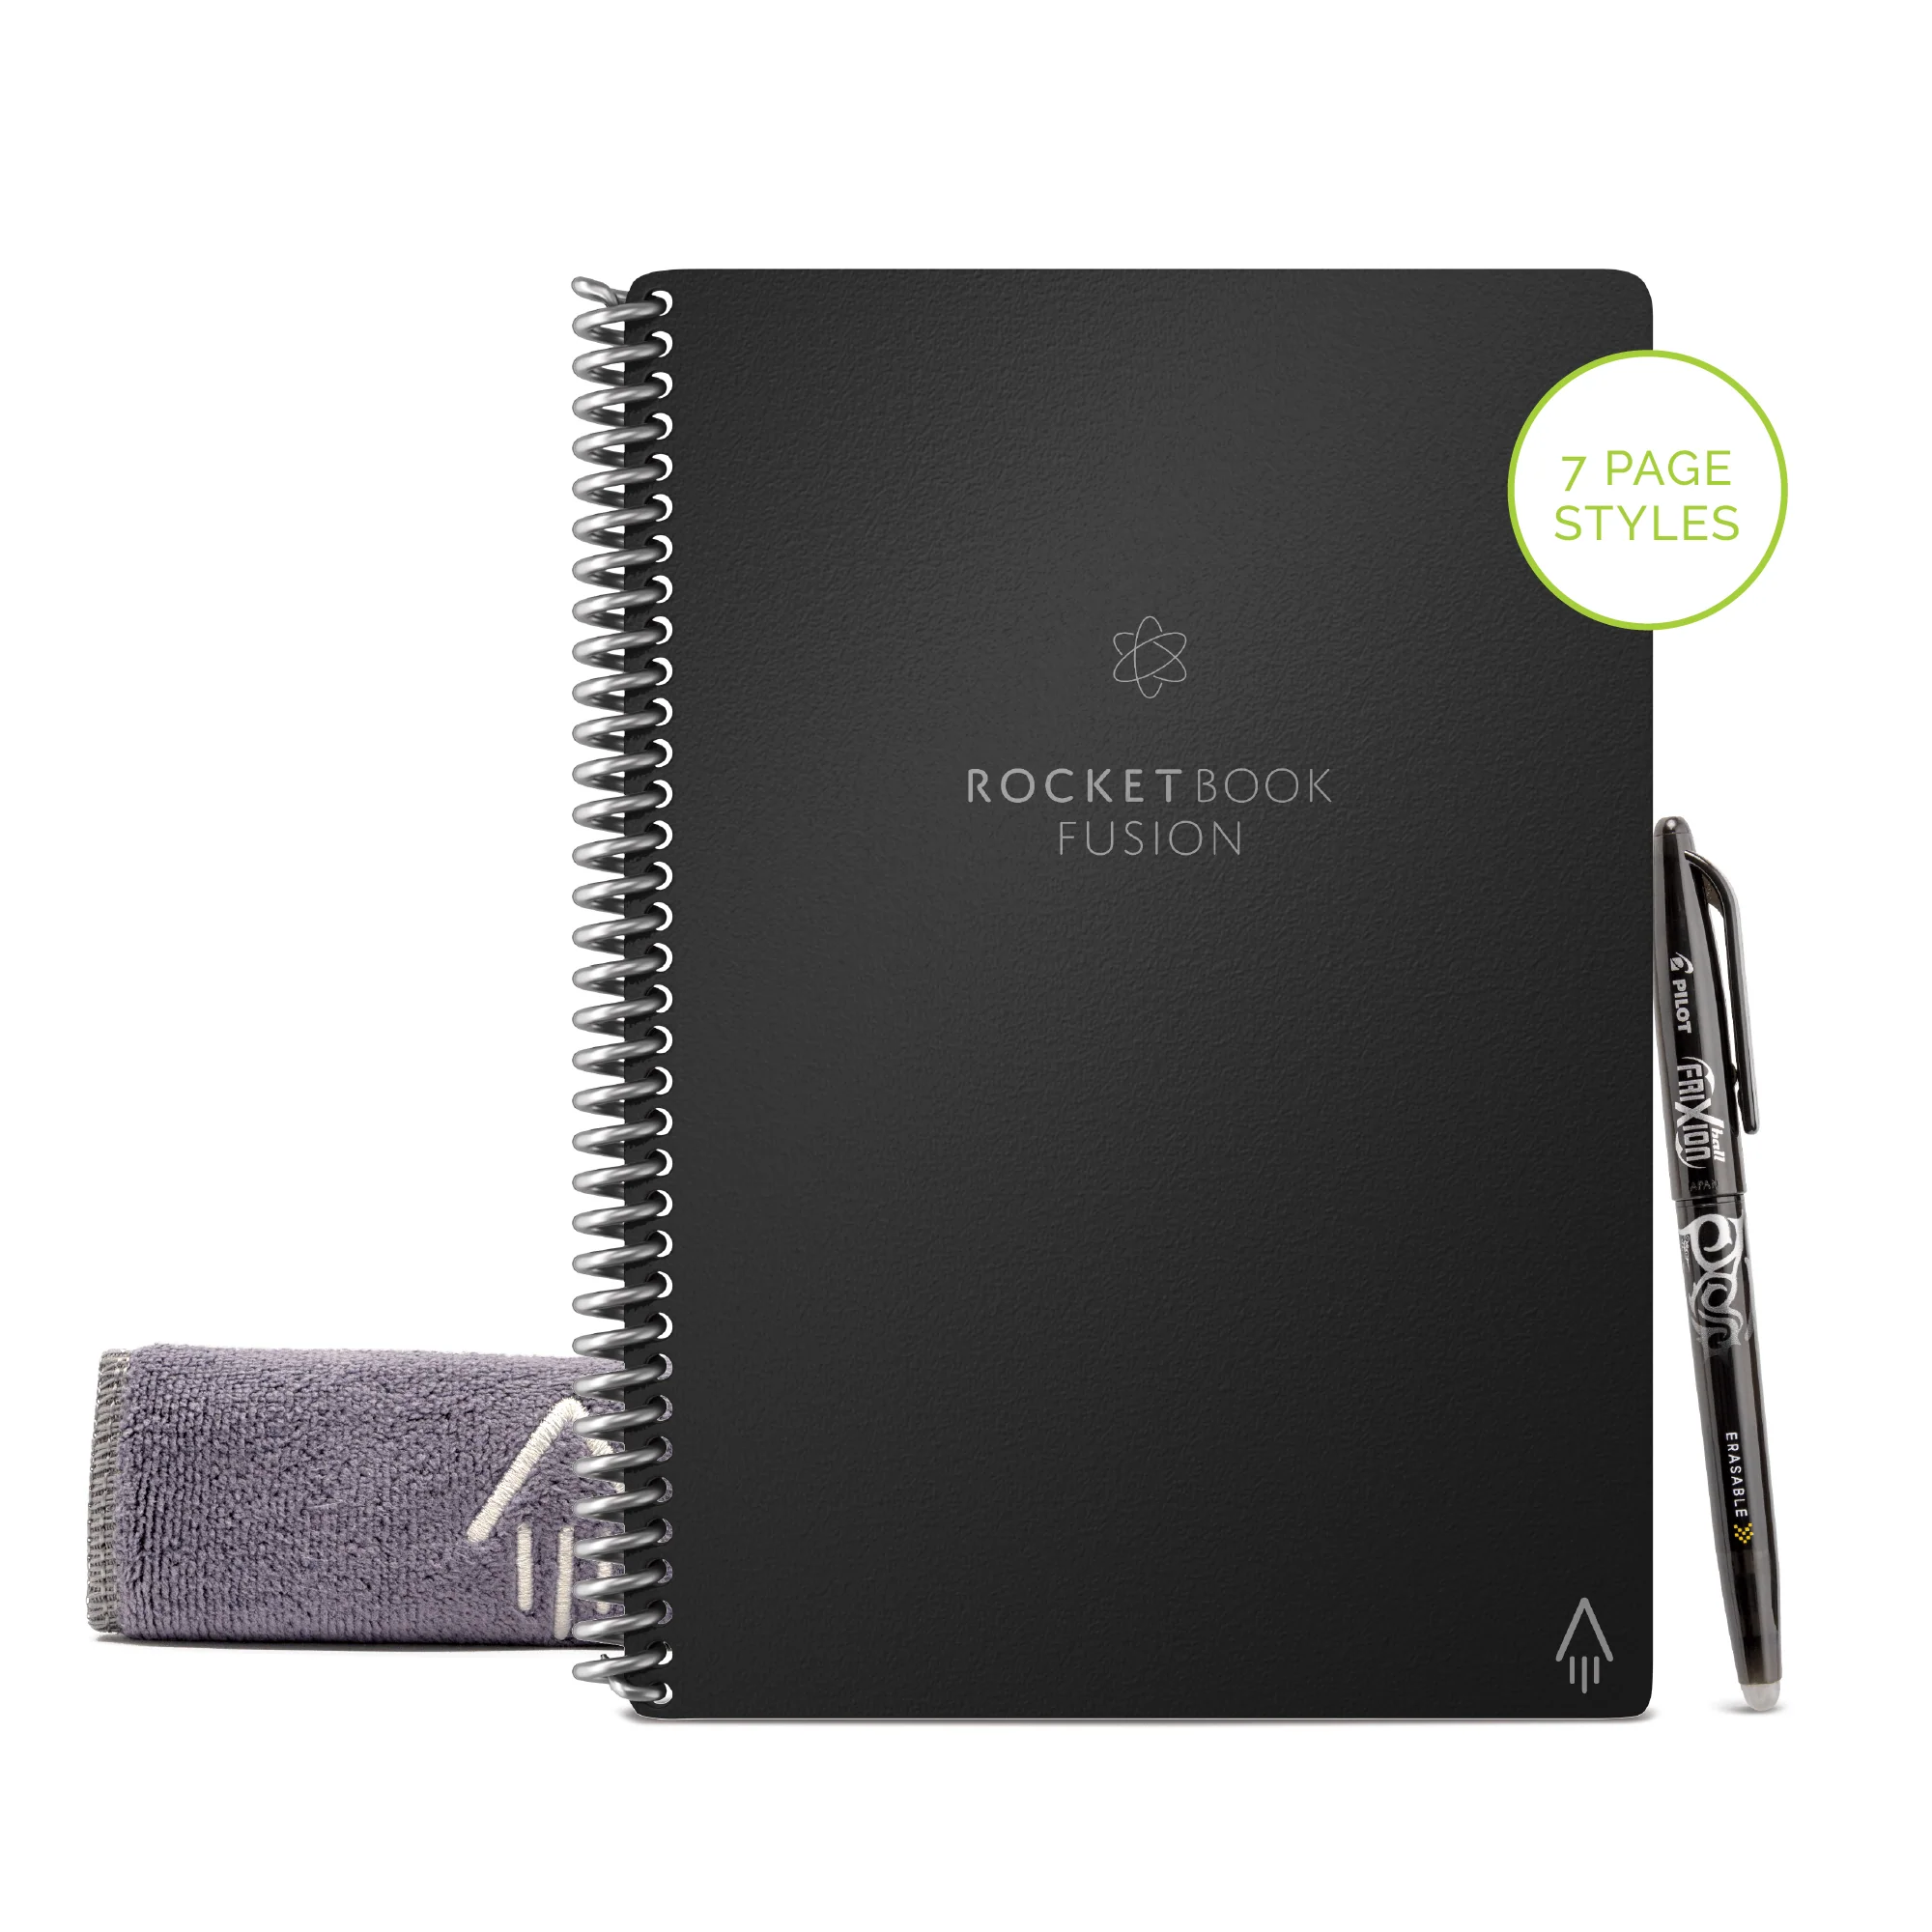 Rocket Book© FUSION - Smart Note Book: Infinity Black, 42  Styled Pages - A5